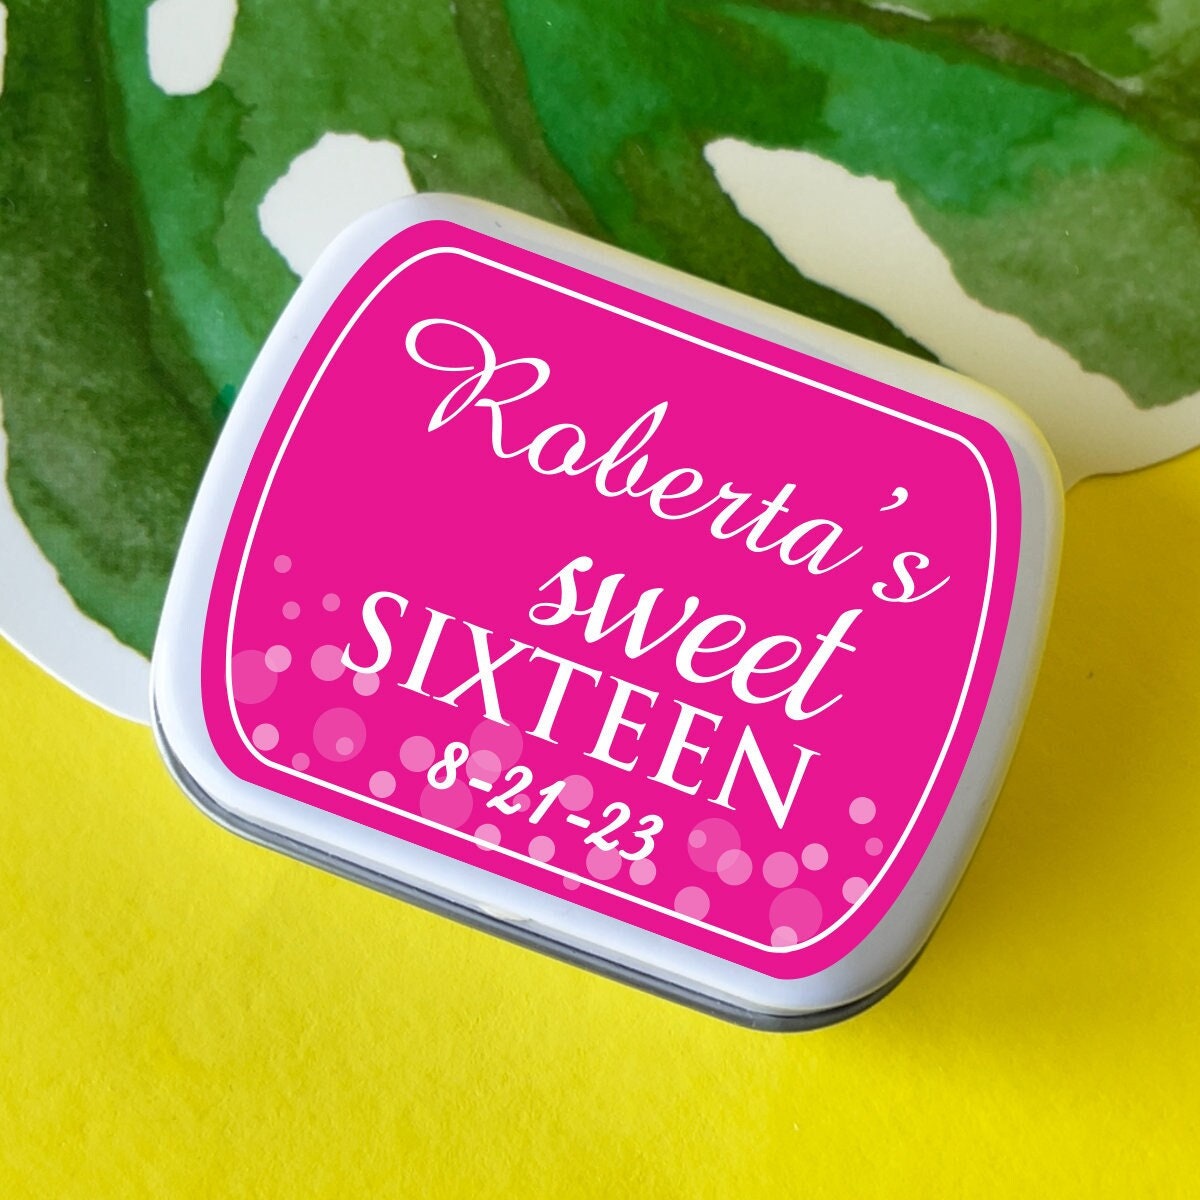 Personalized Expressions Collection Mint Tins